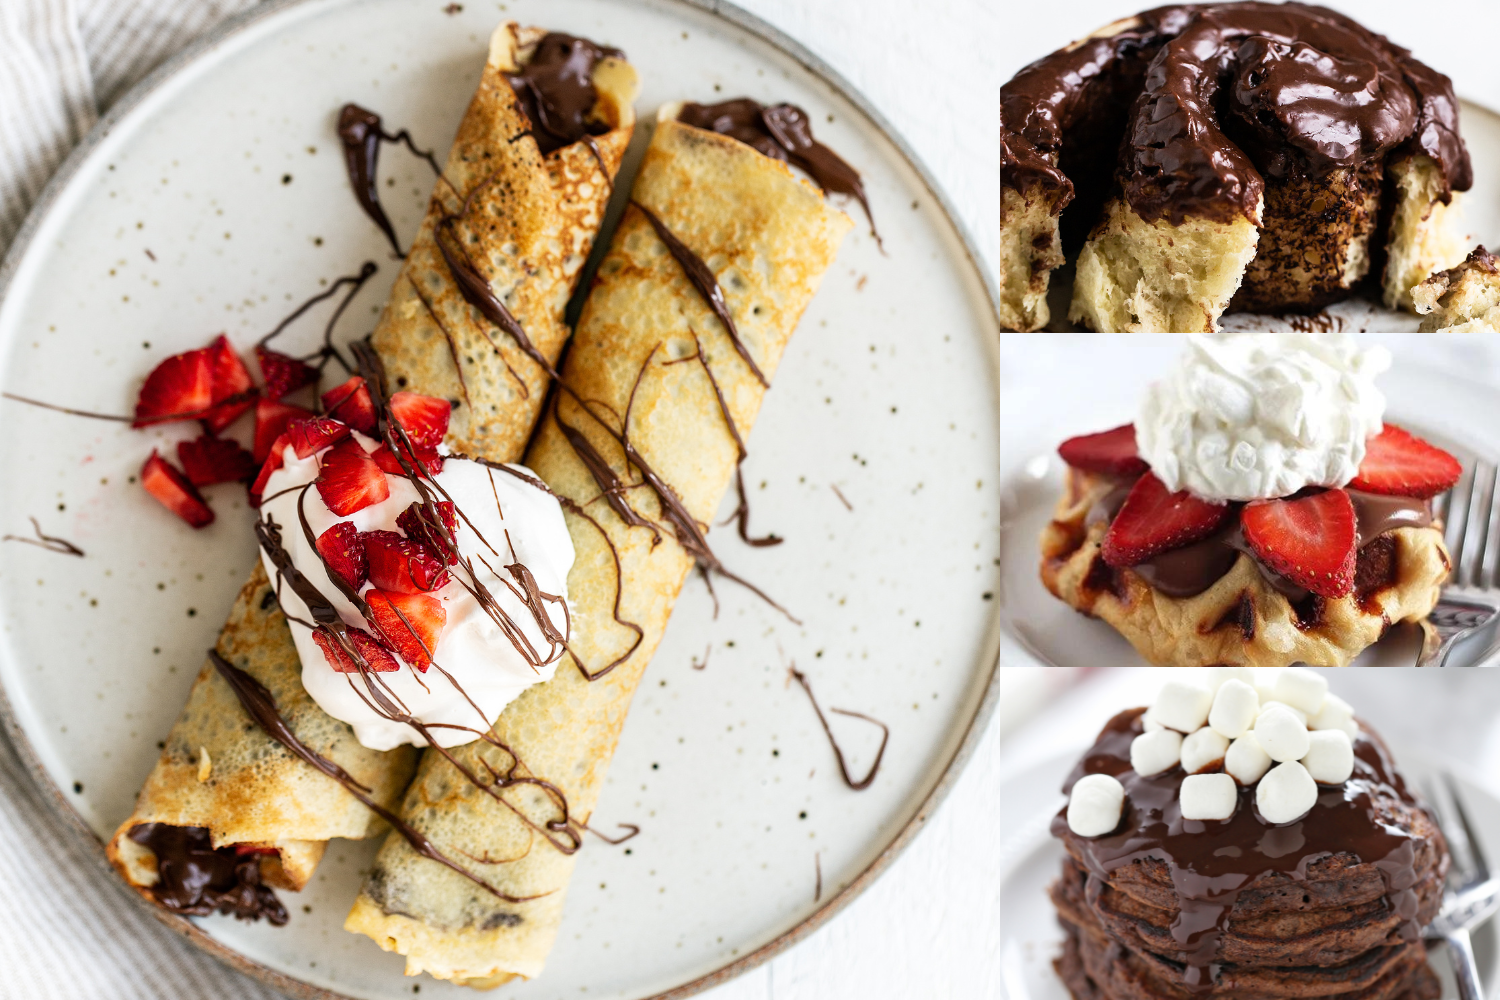 a large image of two crepes drizzled with chocolate and topped with whipped cream, next two three stacked smaller images: a chocolate cinnamon roll, a stack of Liege waffles, and a stack of chocolate pancakes with mini marshmallows on top.